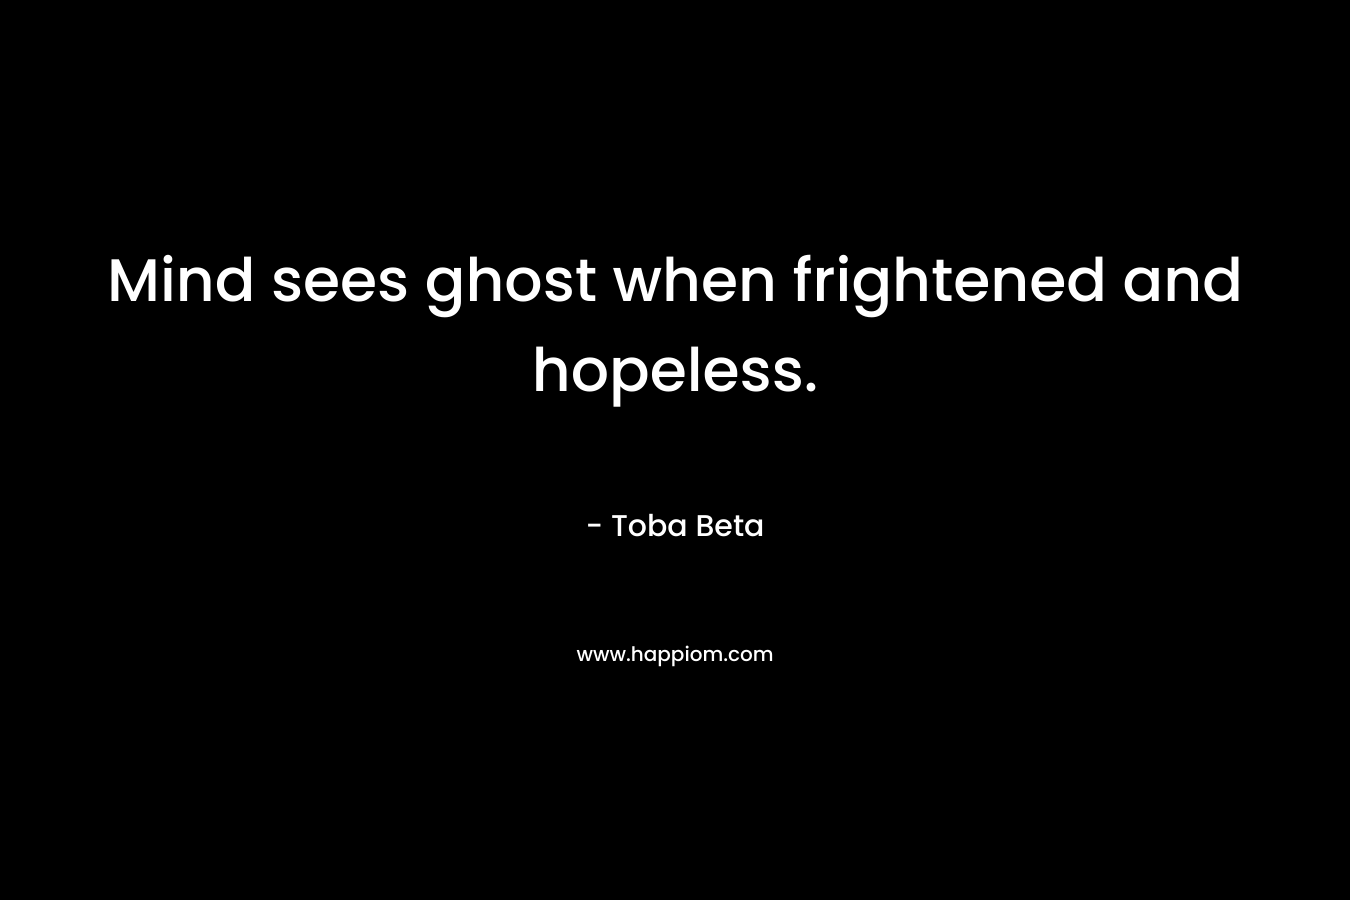 Mind sees ghost when frightened and hopeless.